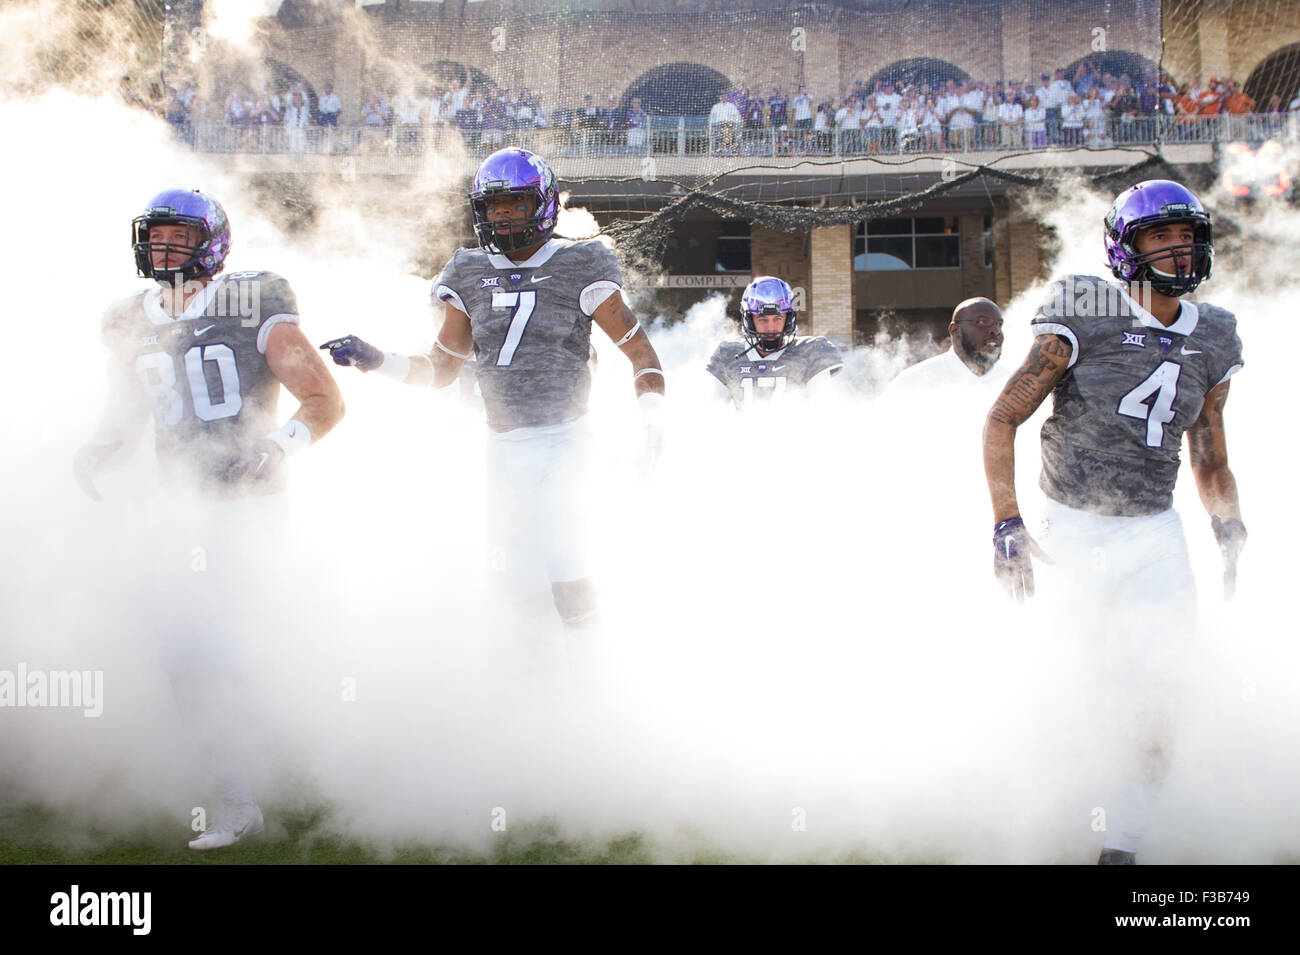 October 3, 2015: Member of the TCU Horned Frogs take the field prior to an NCAA Football game between the TCU Horned Frogs and Texas Longhorns at Amon G. Carter Stadium, Ft. Worth, Texas. Stock Photo